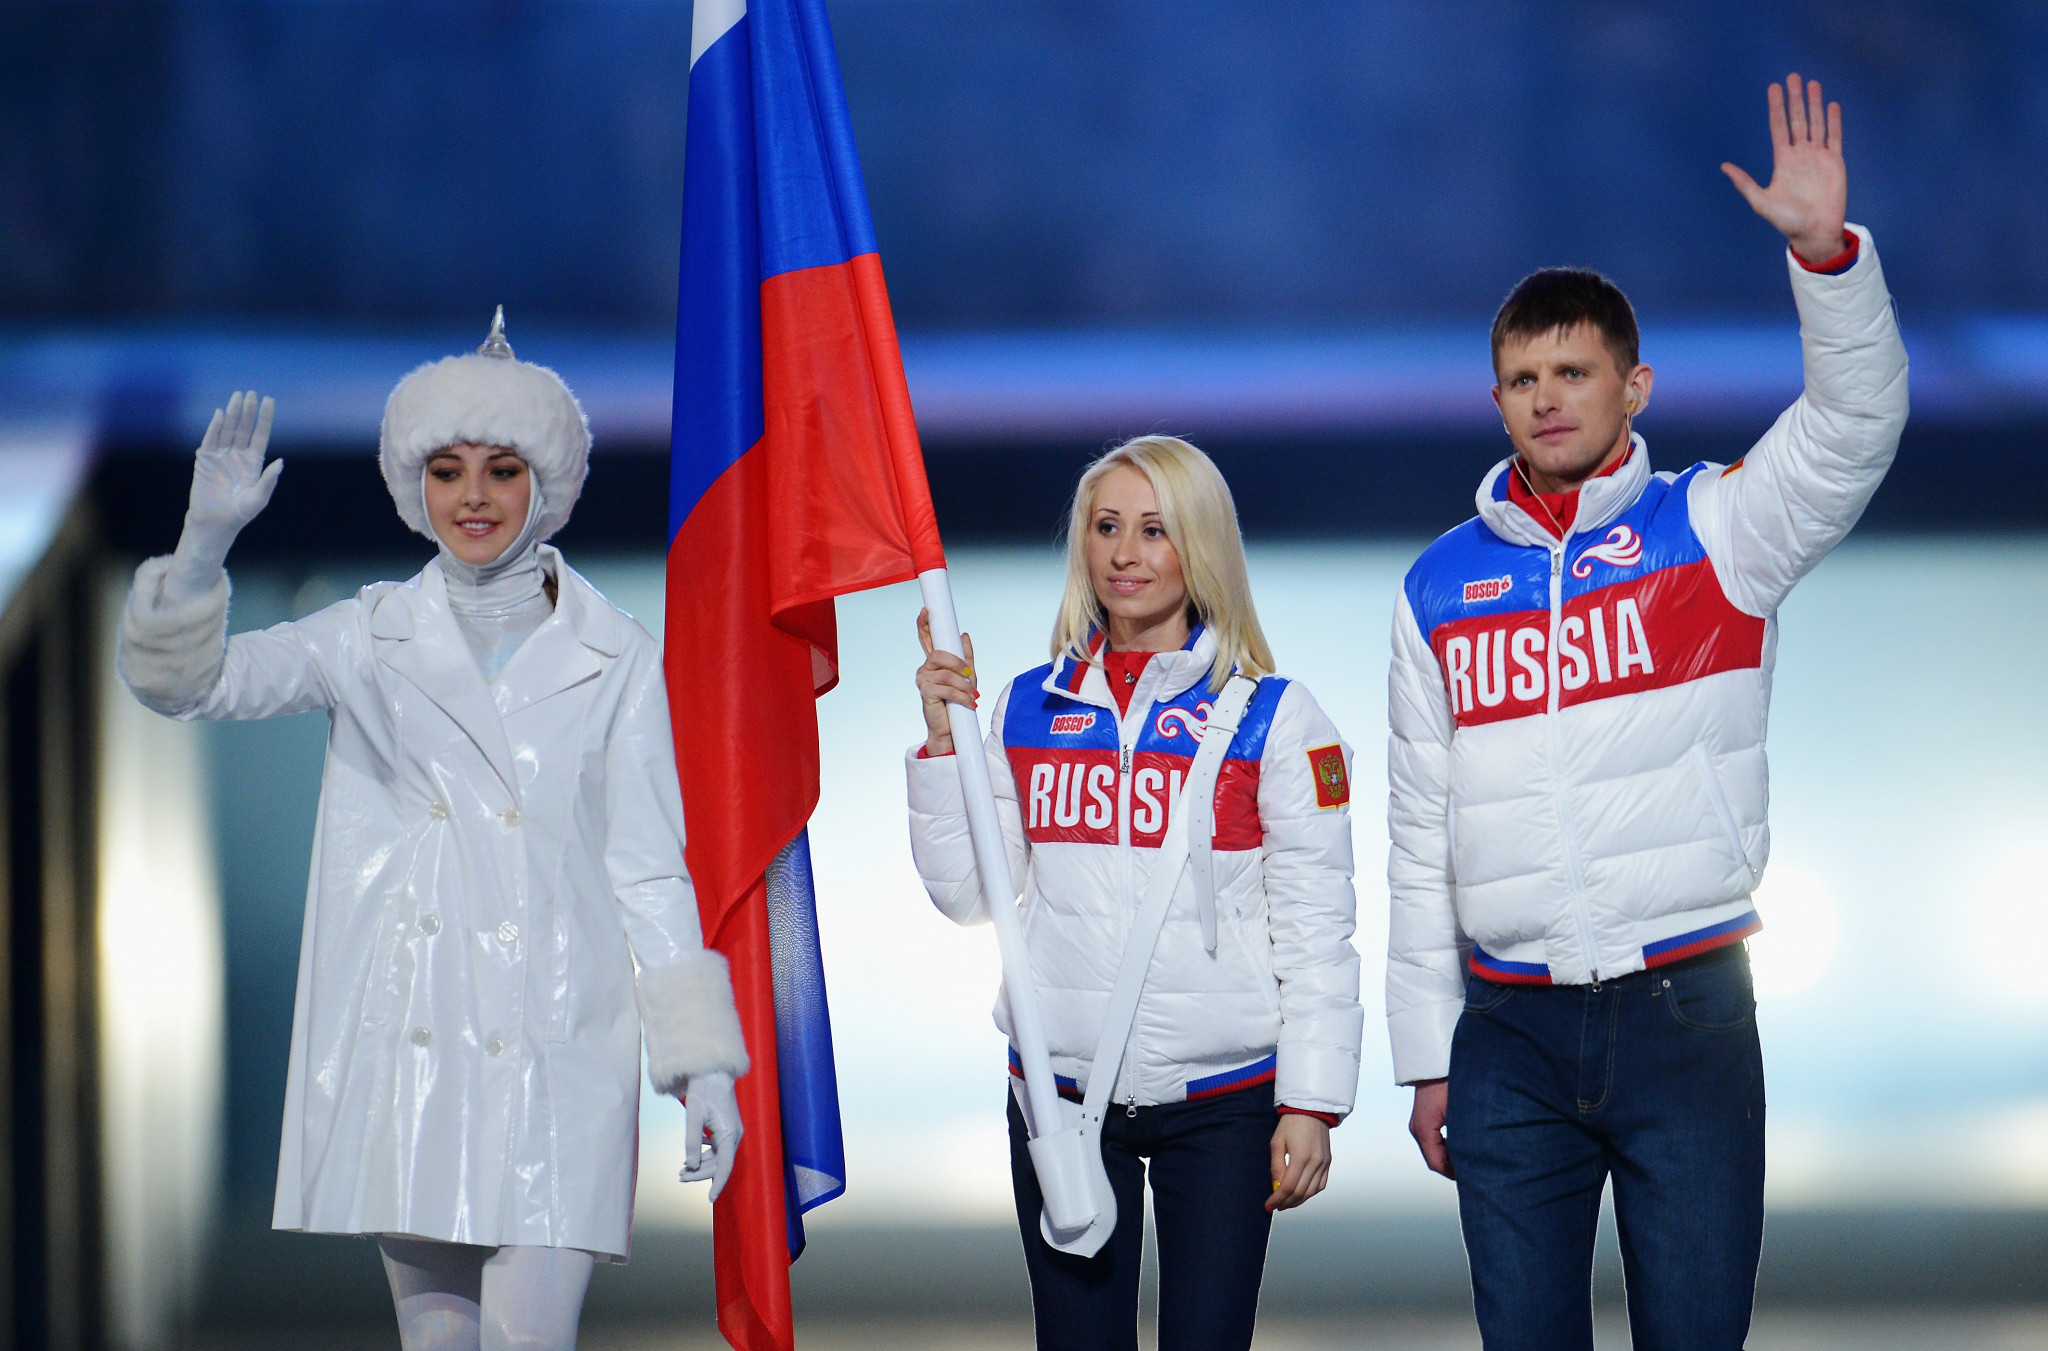 Russia has not competed under its under own flag at the Paralympic Games since the country hosted Sochi 2014 ©Getty Images